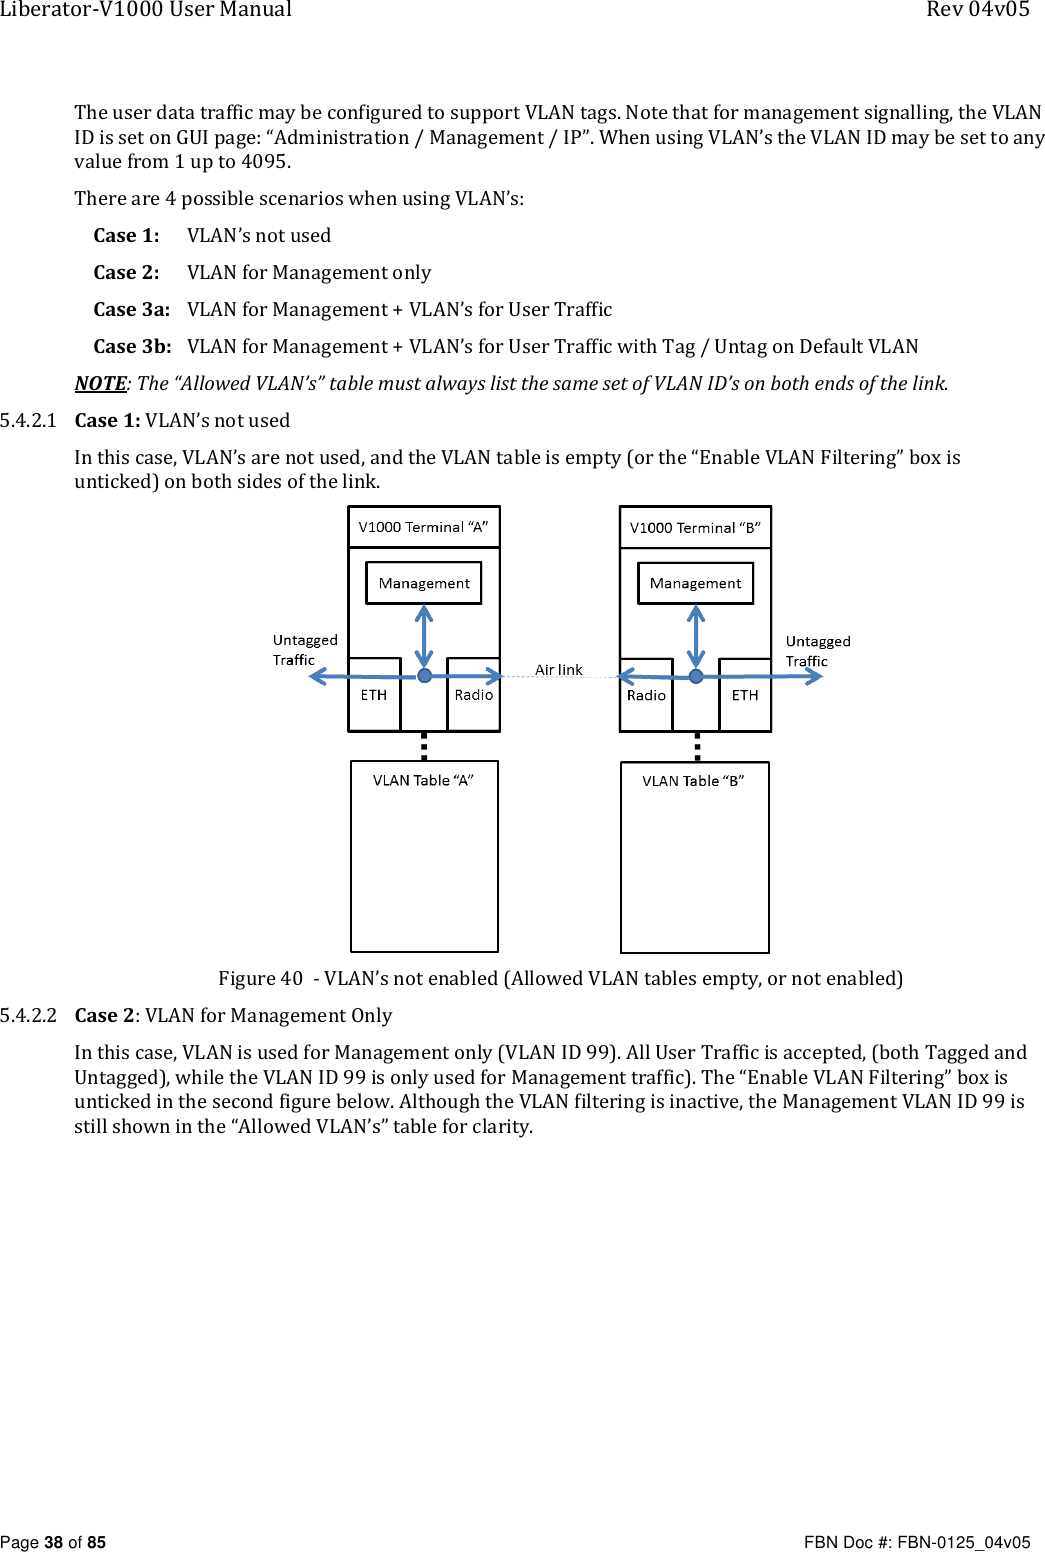 Liberator-V1000 User Manual  Rev 04v05     Page 38 of 85   FBN Doc #: FBN-0125_04v05 The user data traffic may be configured to support VLAN tags. Note that for management signalling, the VLAN ID is set on GUI page: “Administration / Management / IP”. When using VLAN’s the VLAN ID may be set to any value from 1 up to 4095. There are 4 possible scenarios when using VLAN’s: Case 1:   VLAN’s not used Case 2:  VLAN for Management only Case 3a: VLAN for Management + VLAN’s for User Traffic Case 3b: VLAN for Management + VLAN’s for User Traffic with Tag / Untag on Default VLAN NOTE: The “Allowed VLAN’s” table must always list the same set of VLAN ID’s on both ends of the link.  5.4.2.1 Case 1: VLAN’s not used In this case, VLAN’s are not used, and the VLAN table is empty (or the “Enable VLAN Filtering” box is unticked) on both sides of the link.  Figure 40  - VLAN’s not enabled (Allowed VLAN tables empty, or not enabled) 5.4.2.2 Case 2: VLAN for Management Only  In this case, VLAN is used for Management only (VLAN ID 99). All User Traffic is accepted, (both Tagged and Untagged), while the VLAN ID 99 is only used for Management traffic). The “Enable VLAN Filtering” box is unticked in the second figure below. Although the VLAN filtering is inactive, the Management VLAN ID 99 is still shown in the “Allowed VLAN’s” table for clarity. 